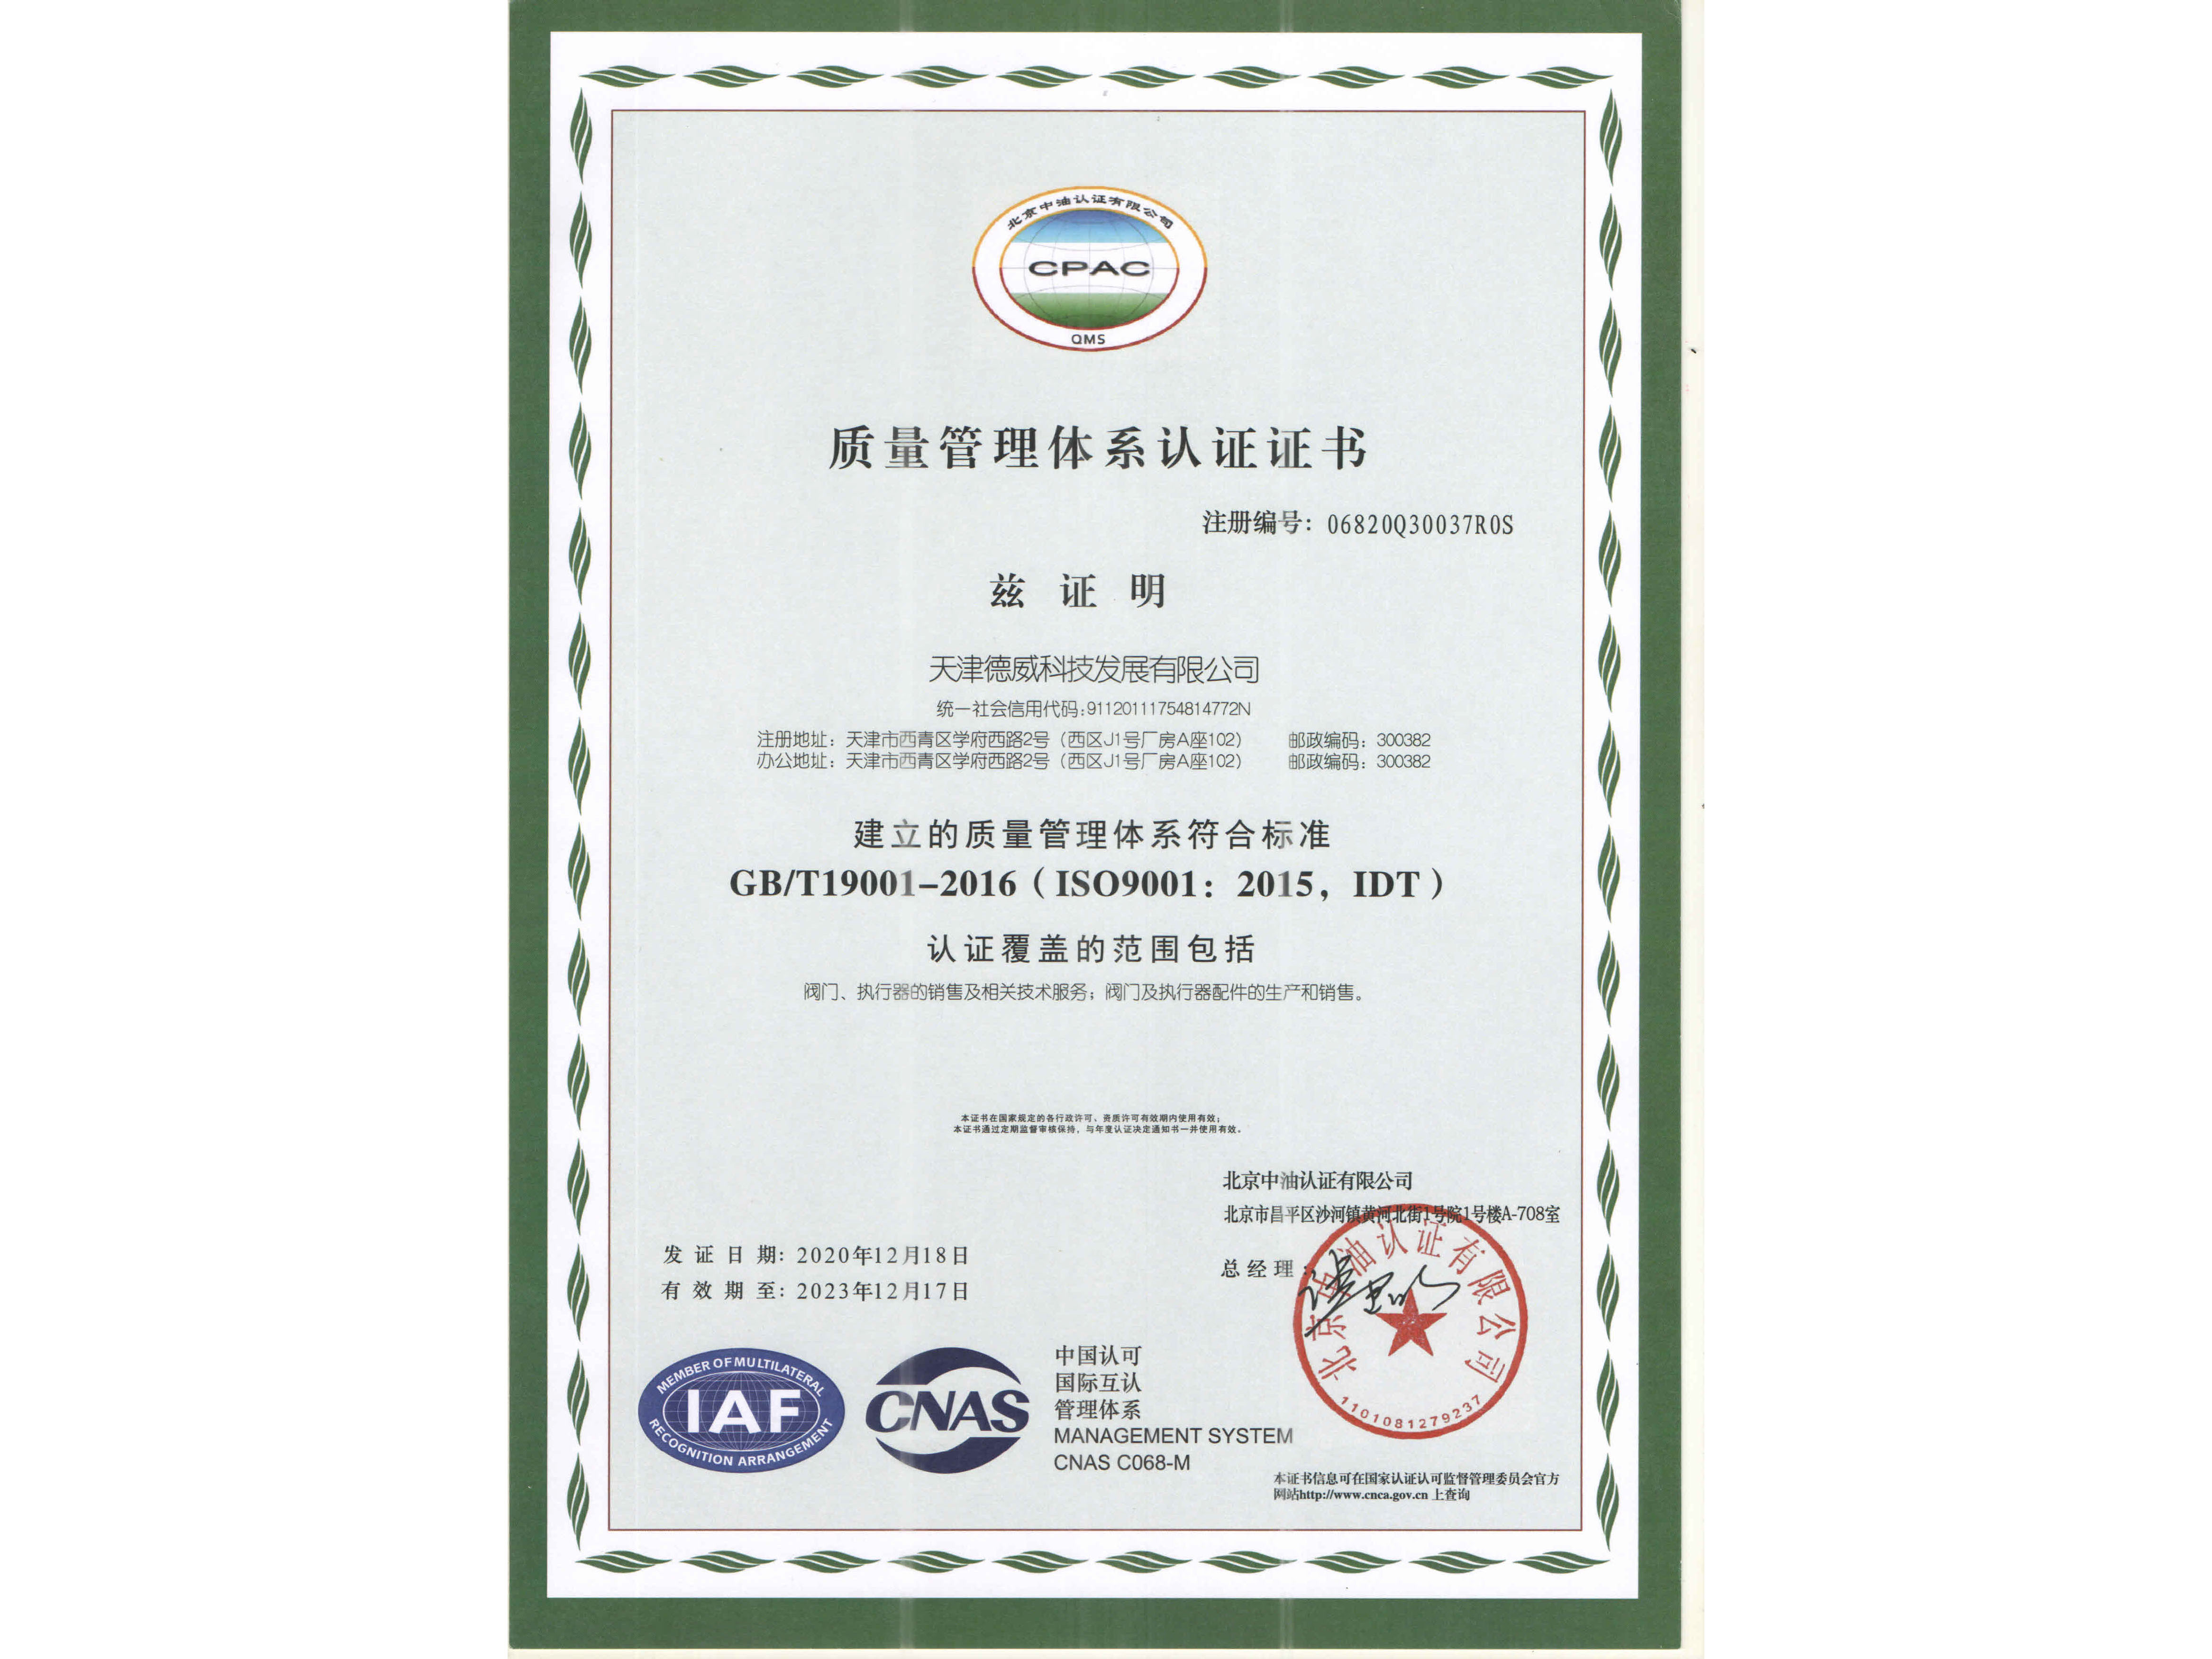 Quality System Certificate 20201218